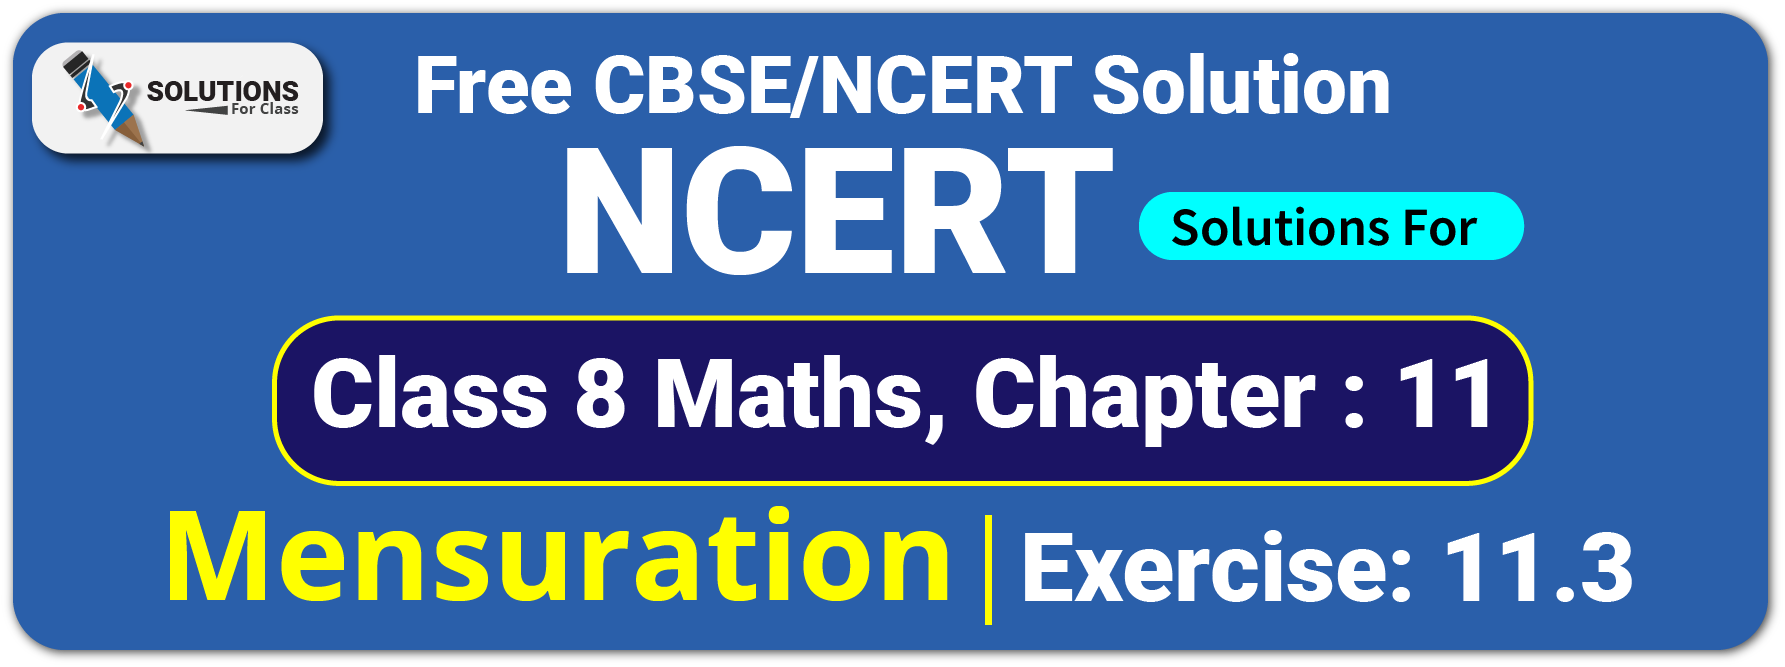 NCERT Solutions For Class 8 Chapter 11, Mensuration, Exercise.11.3